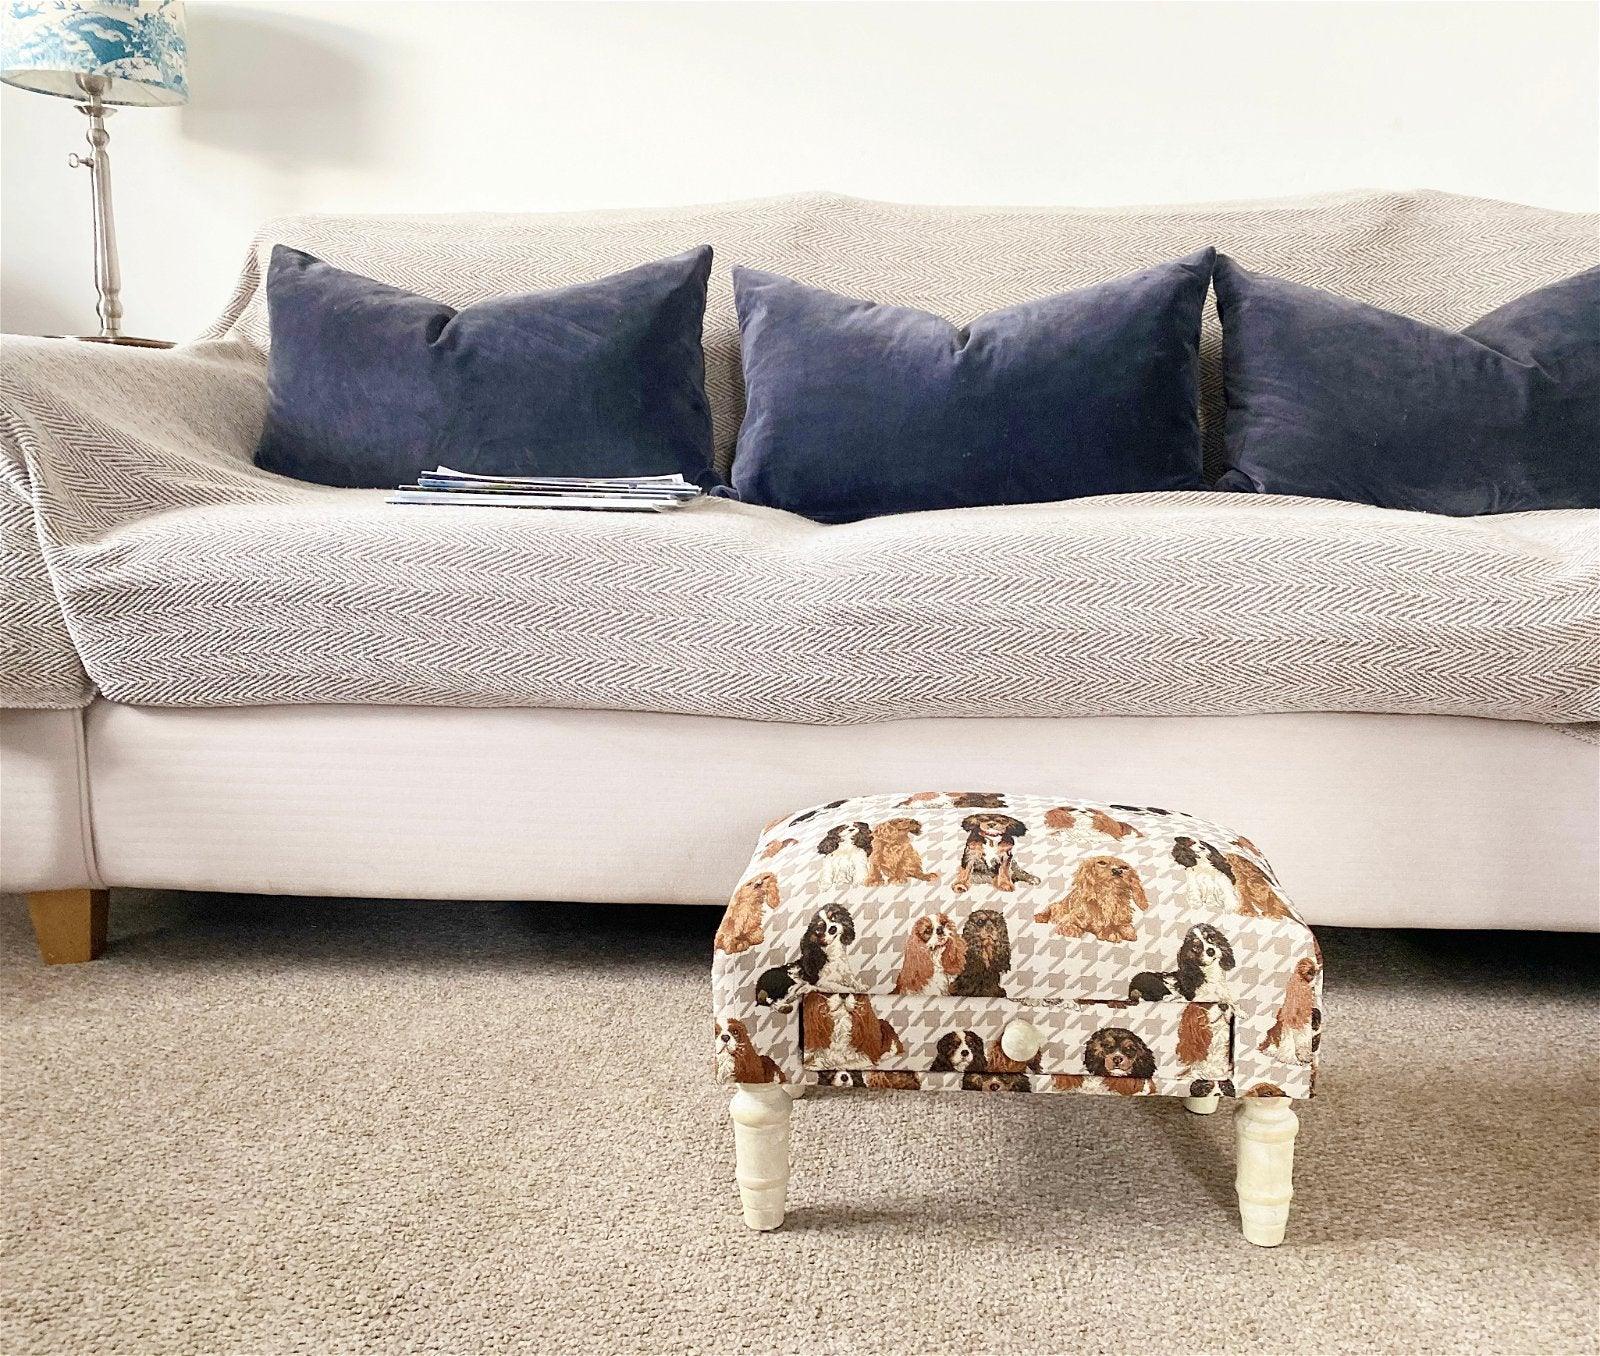 View Dog Fabric Footstool with Drawer information